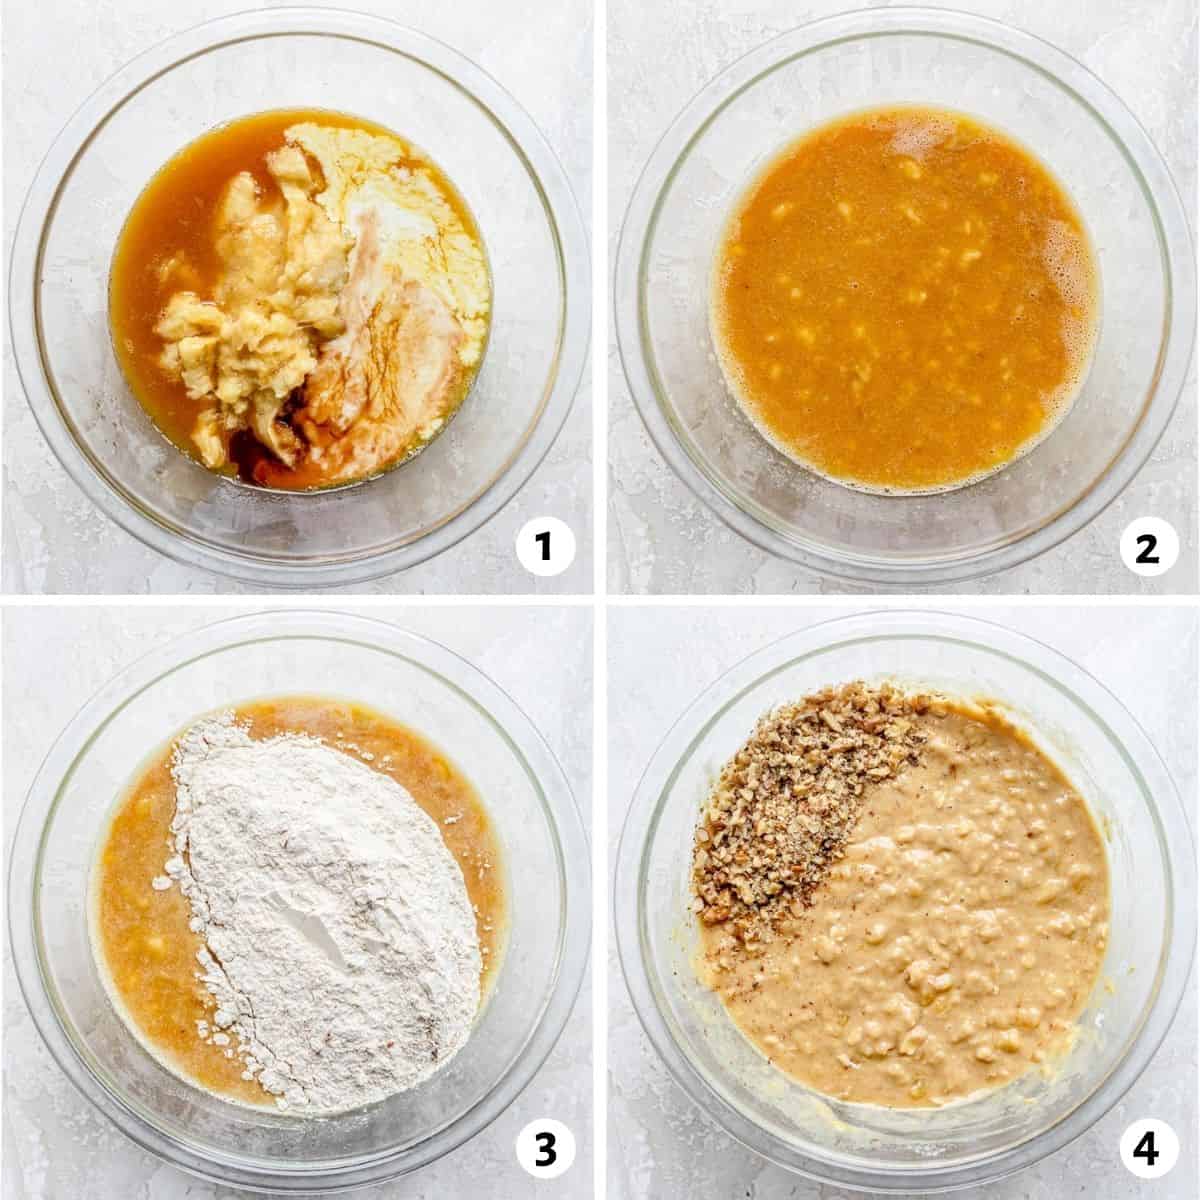 Process shots to show how to prepare the muffin batter